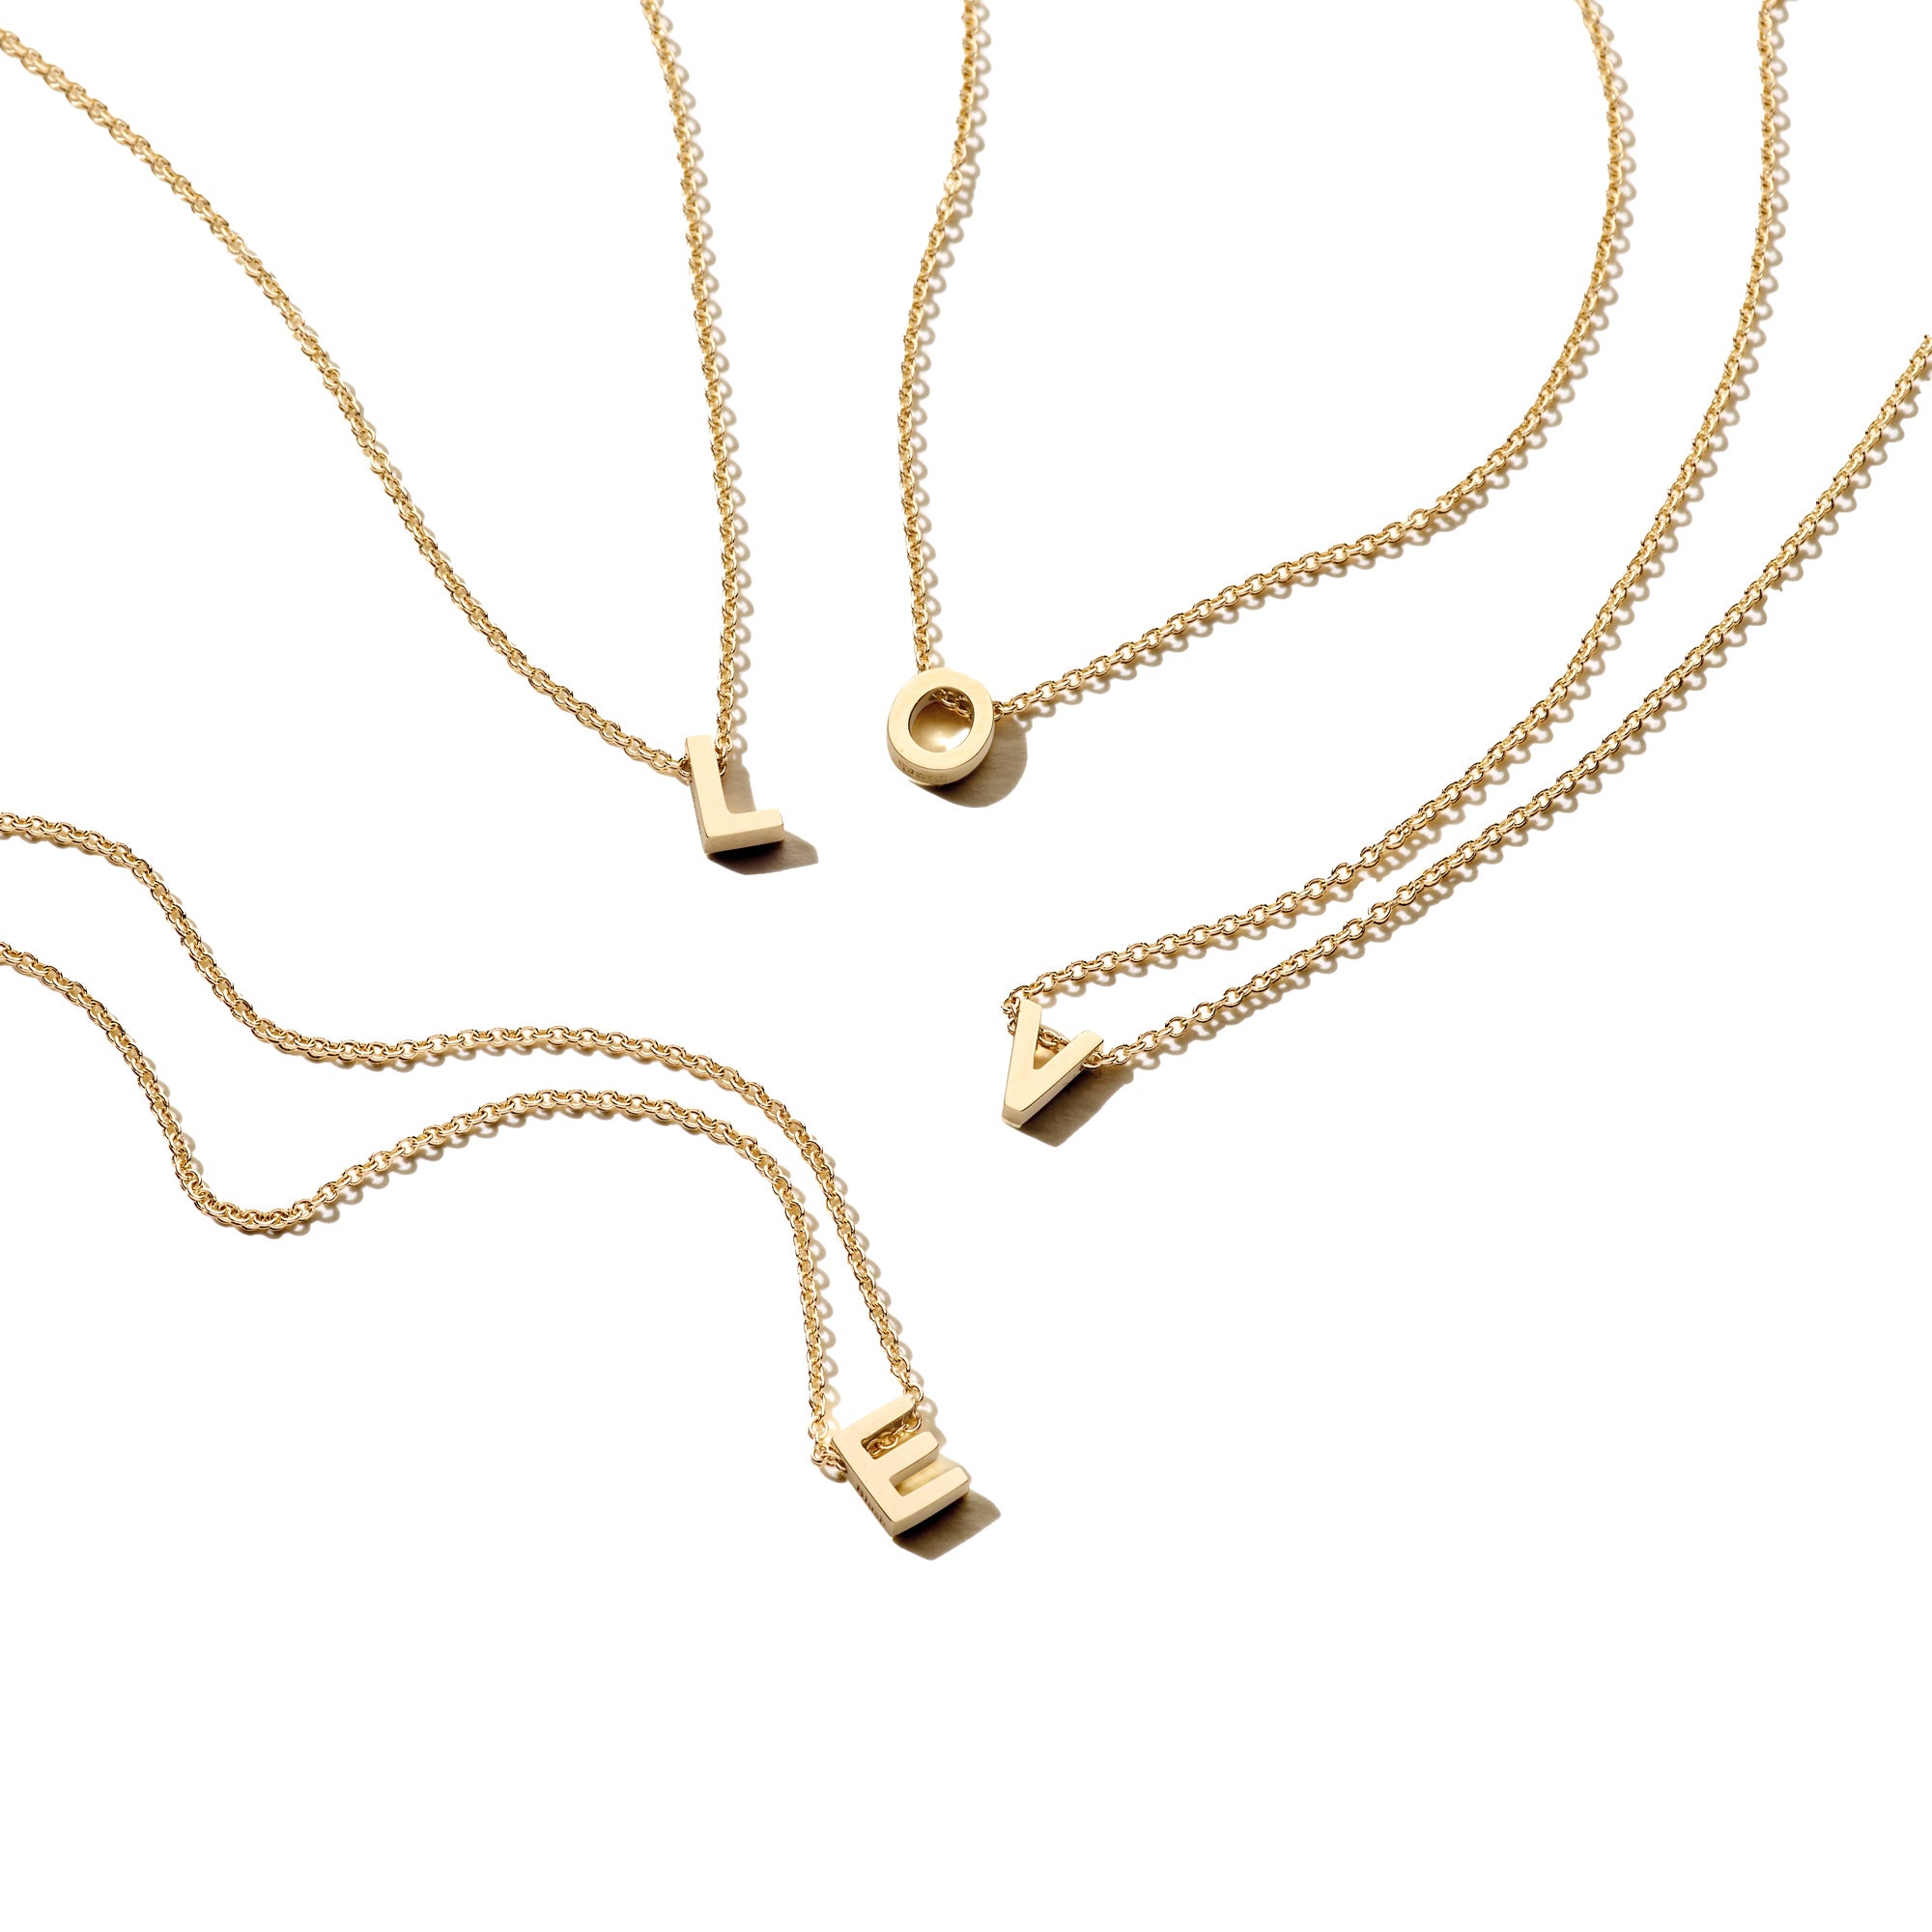 Gold necklaces • 14k necklaces in yellow, white or rose gold